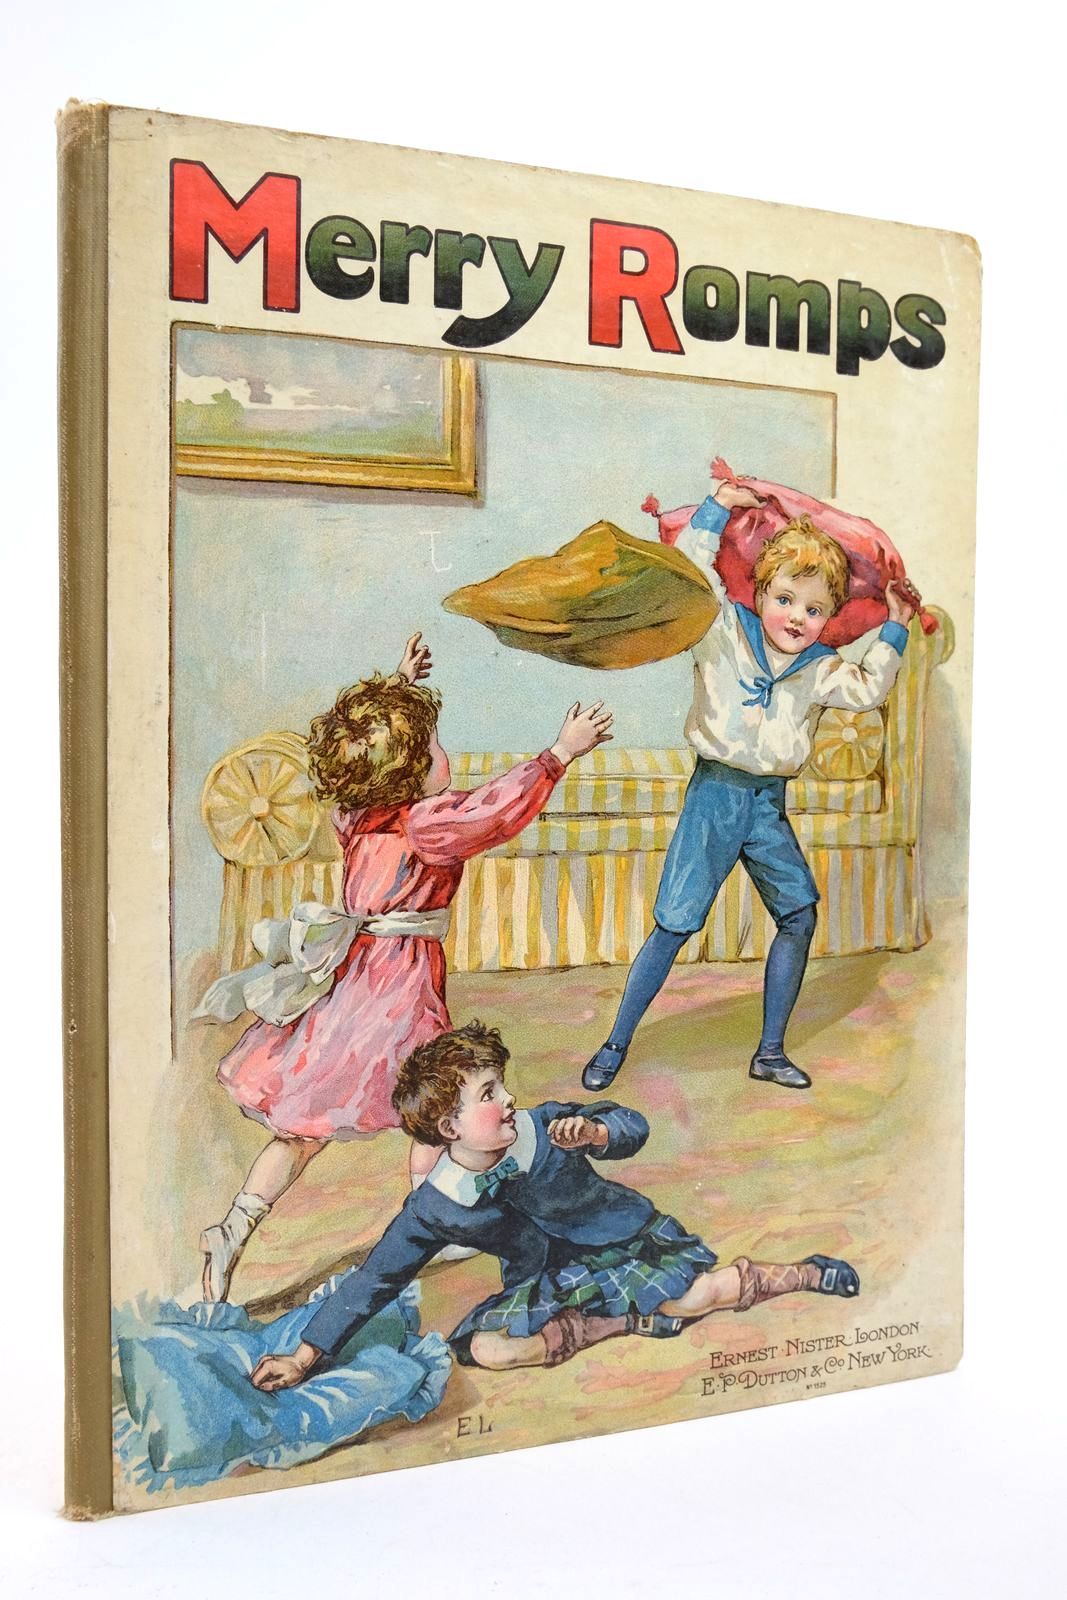 Photo of MERRY ROMPS published by Ernest Nister (STOCK CODE: 2138756)  for sale by Stella & Rose's Books